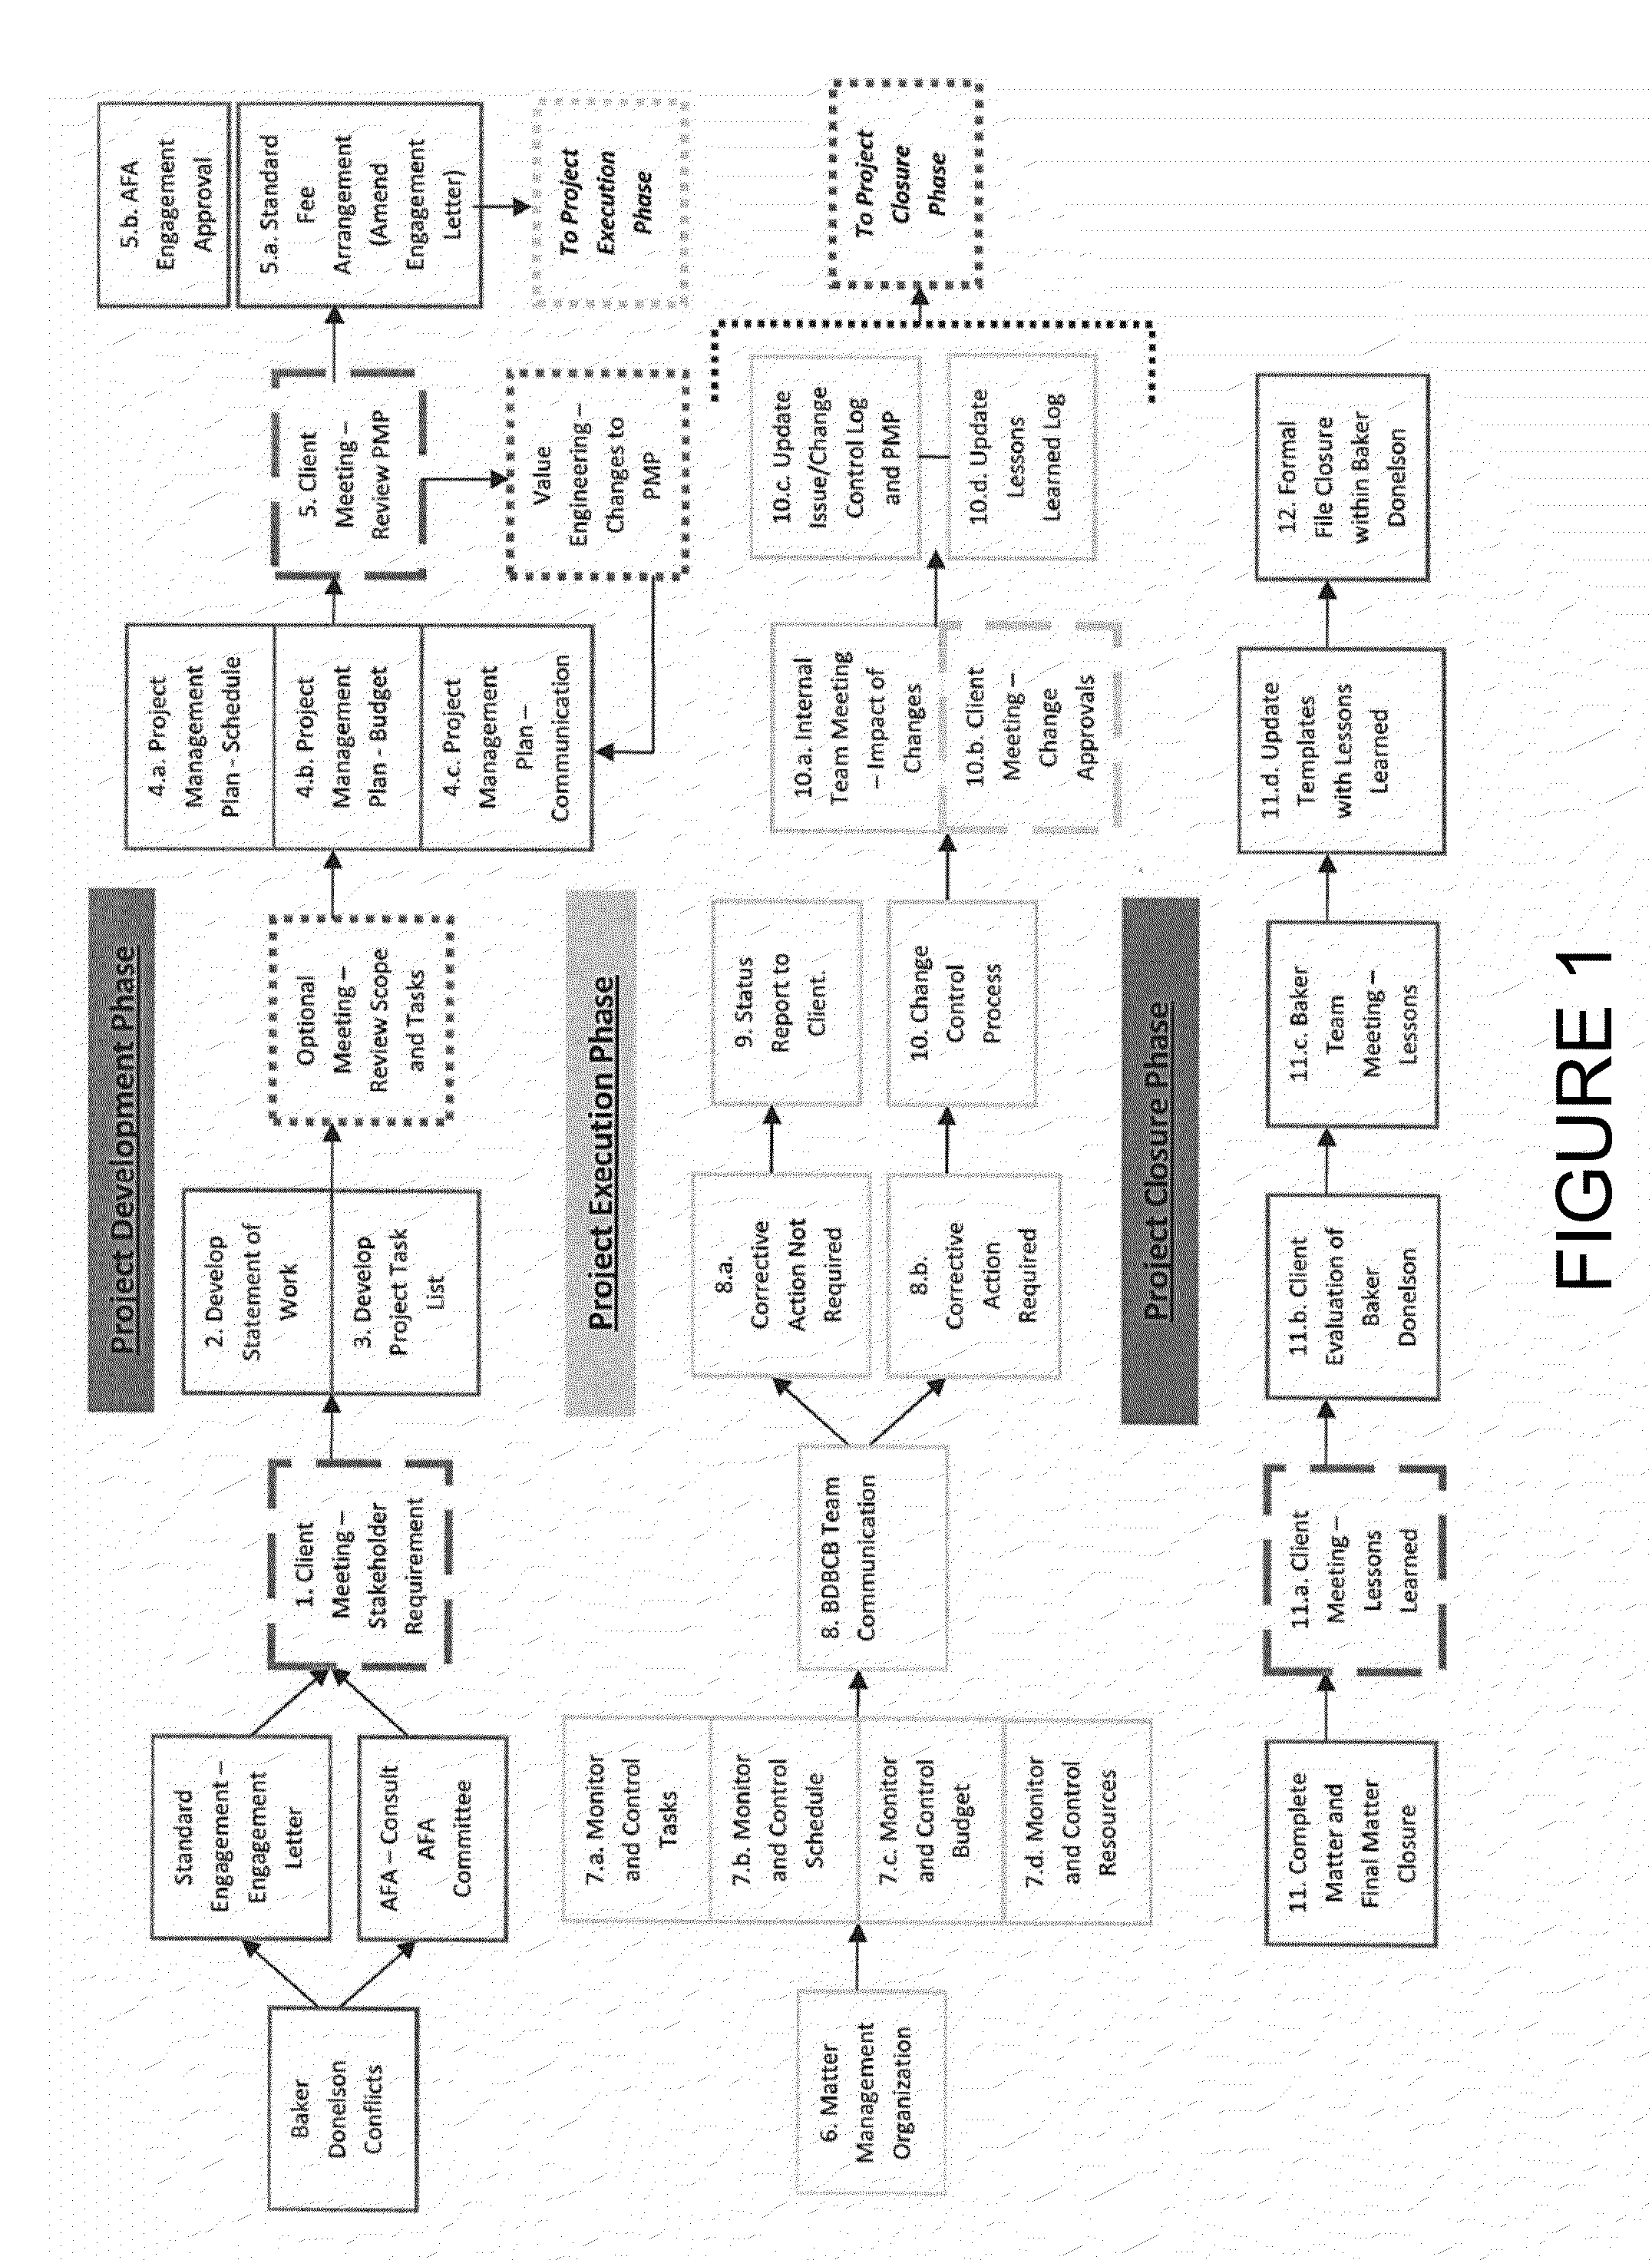 Legal project management system and method